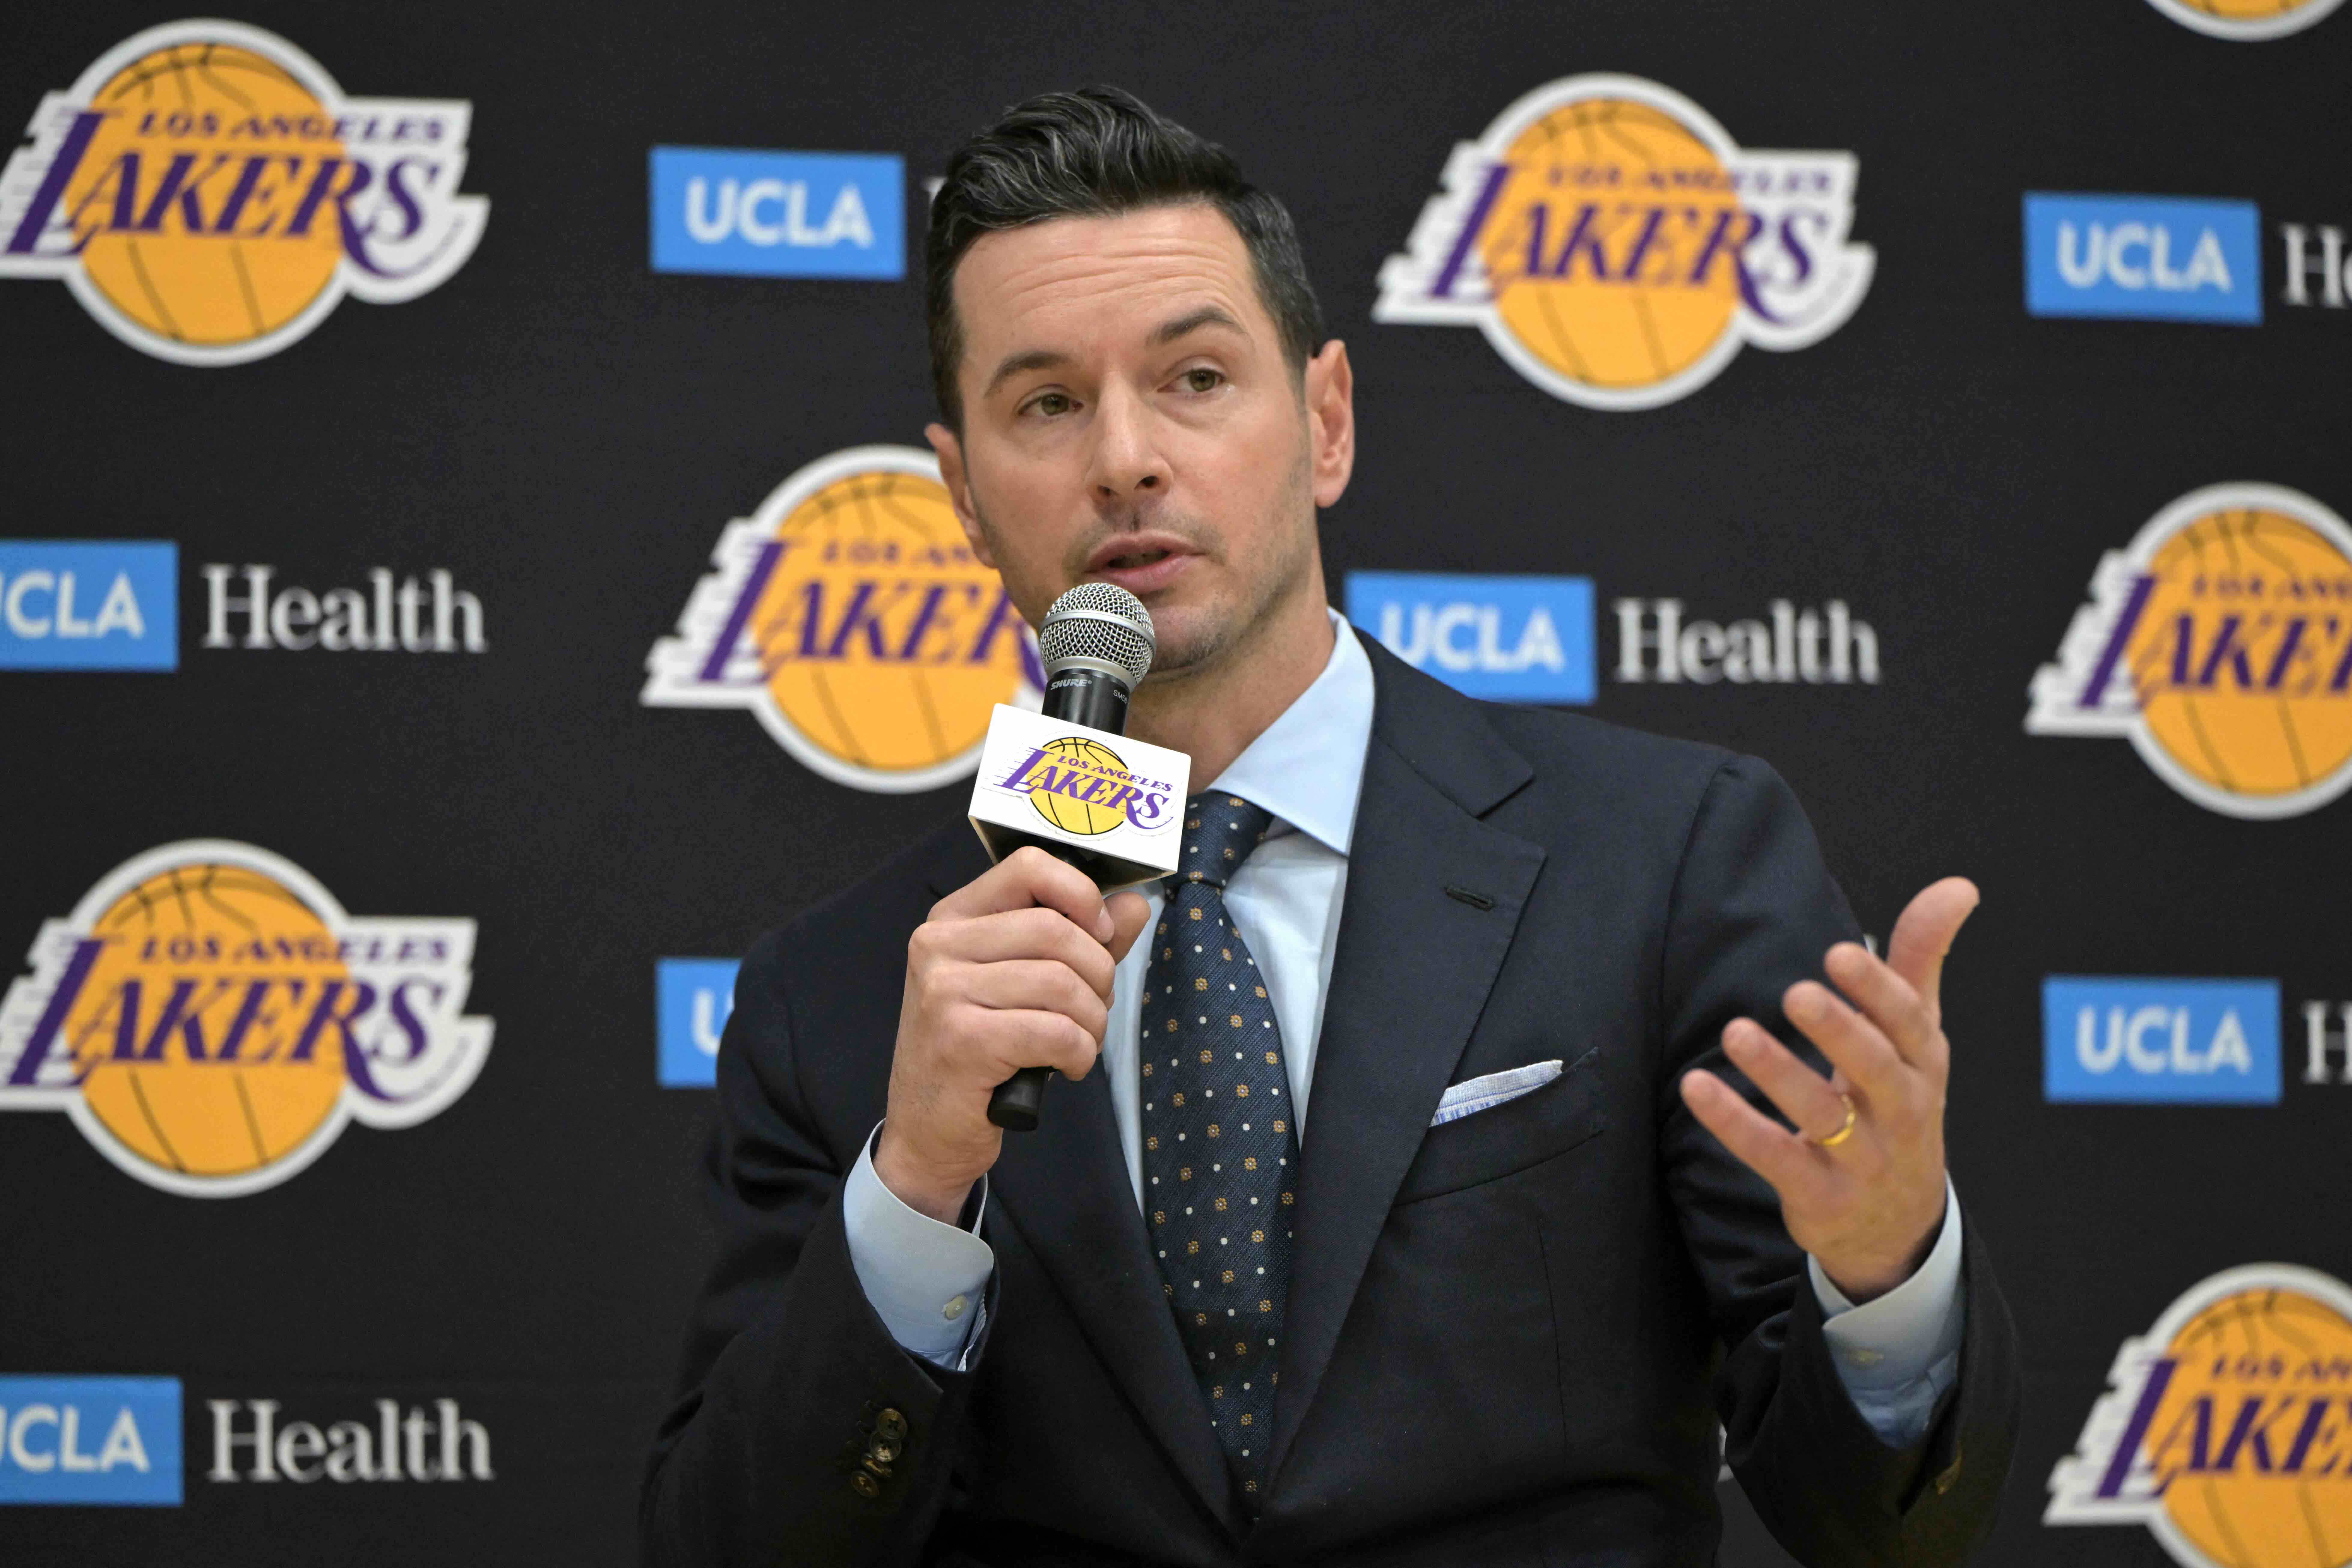 JJ Redick took the reins of the Los Angeles Lakers on Monday